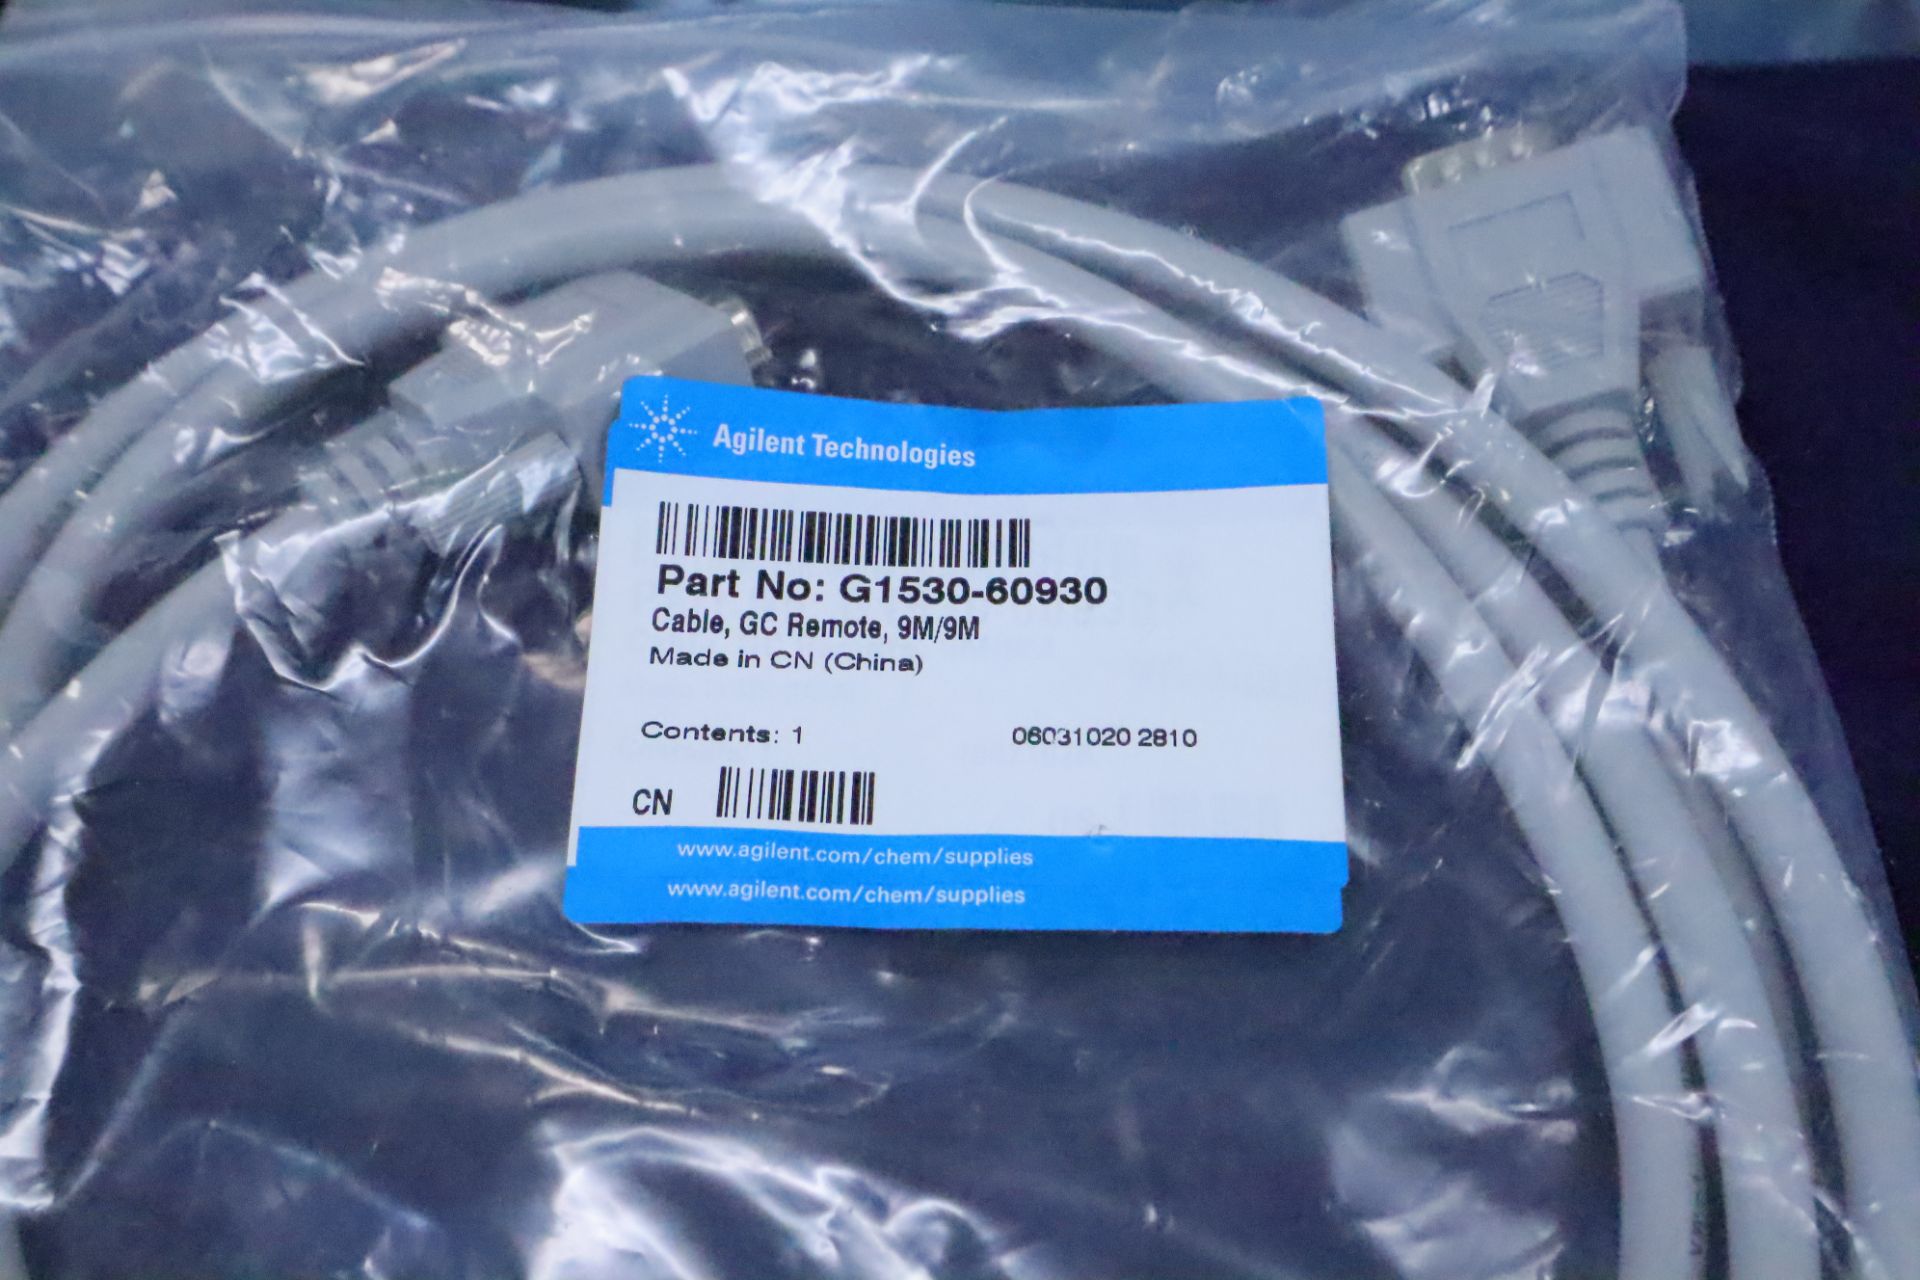 UPDATED PHOTOS Agilent Technologies OEM Replacement Parts and tool kits for LC/MS Machines - Image 8 of 37